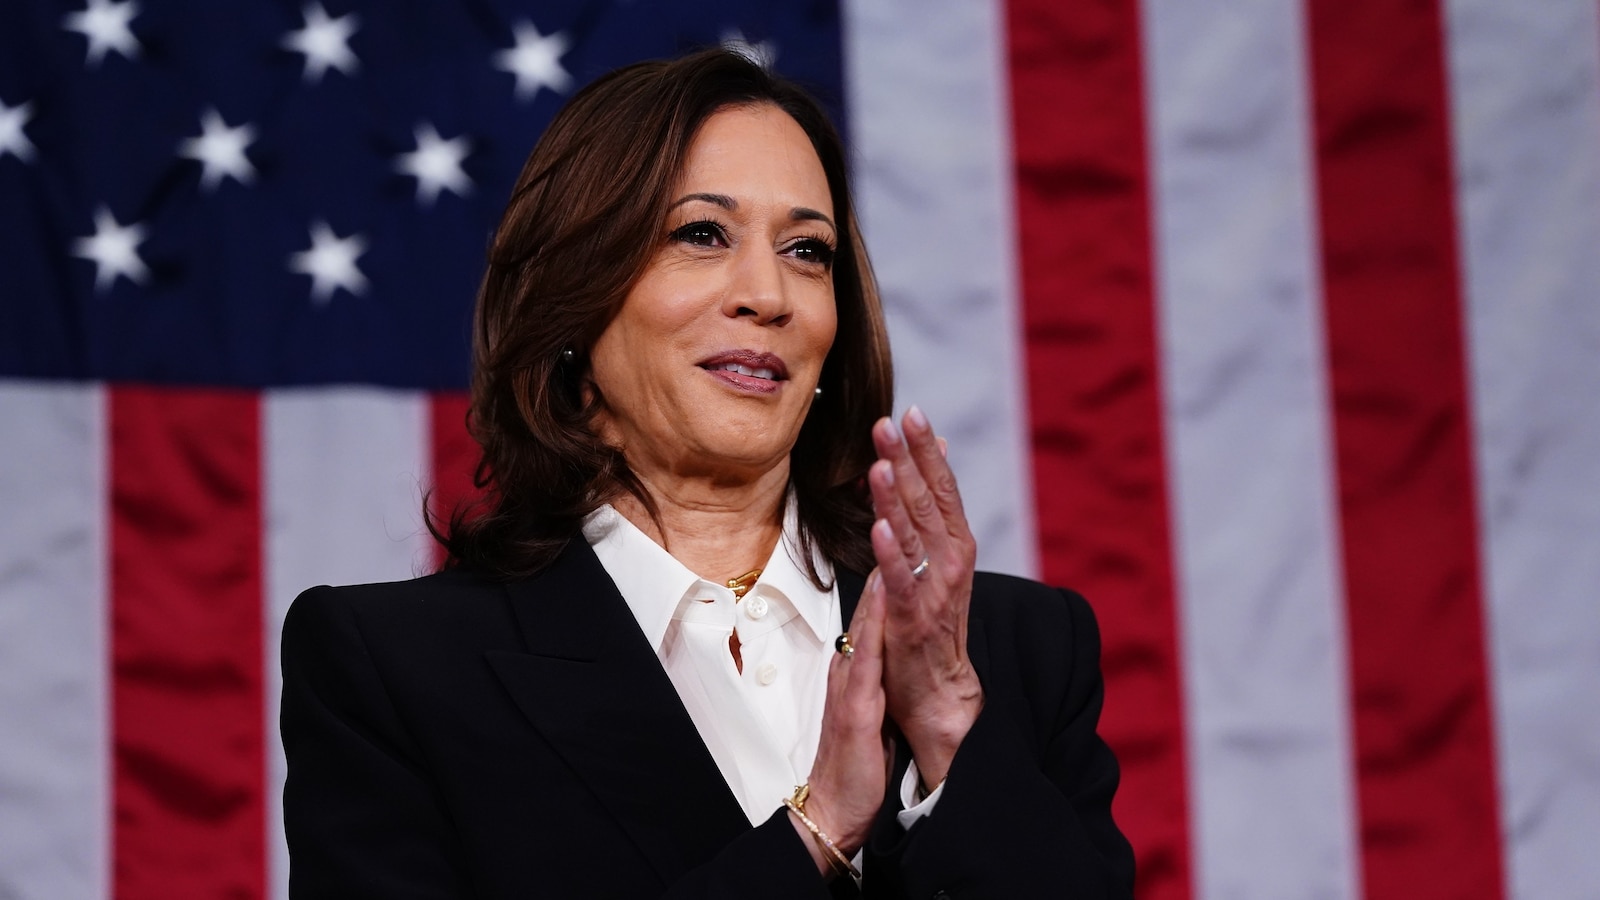 Kamala Harris' super PAC launches 1st campaign ad targeting Trump over Roe v. Wade